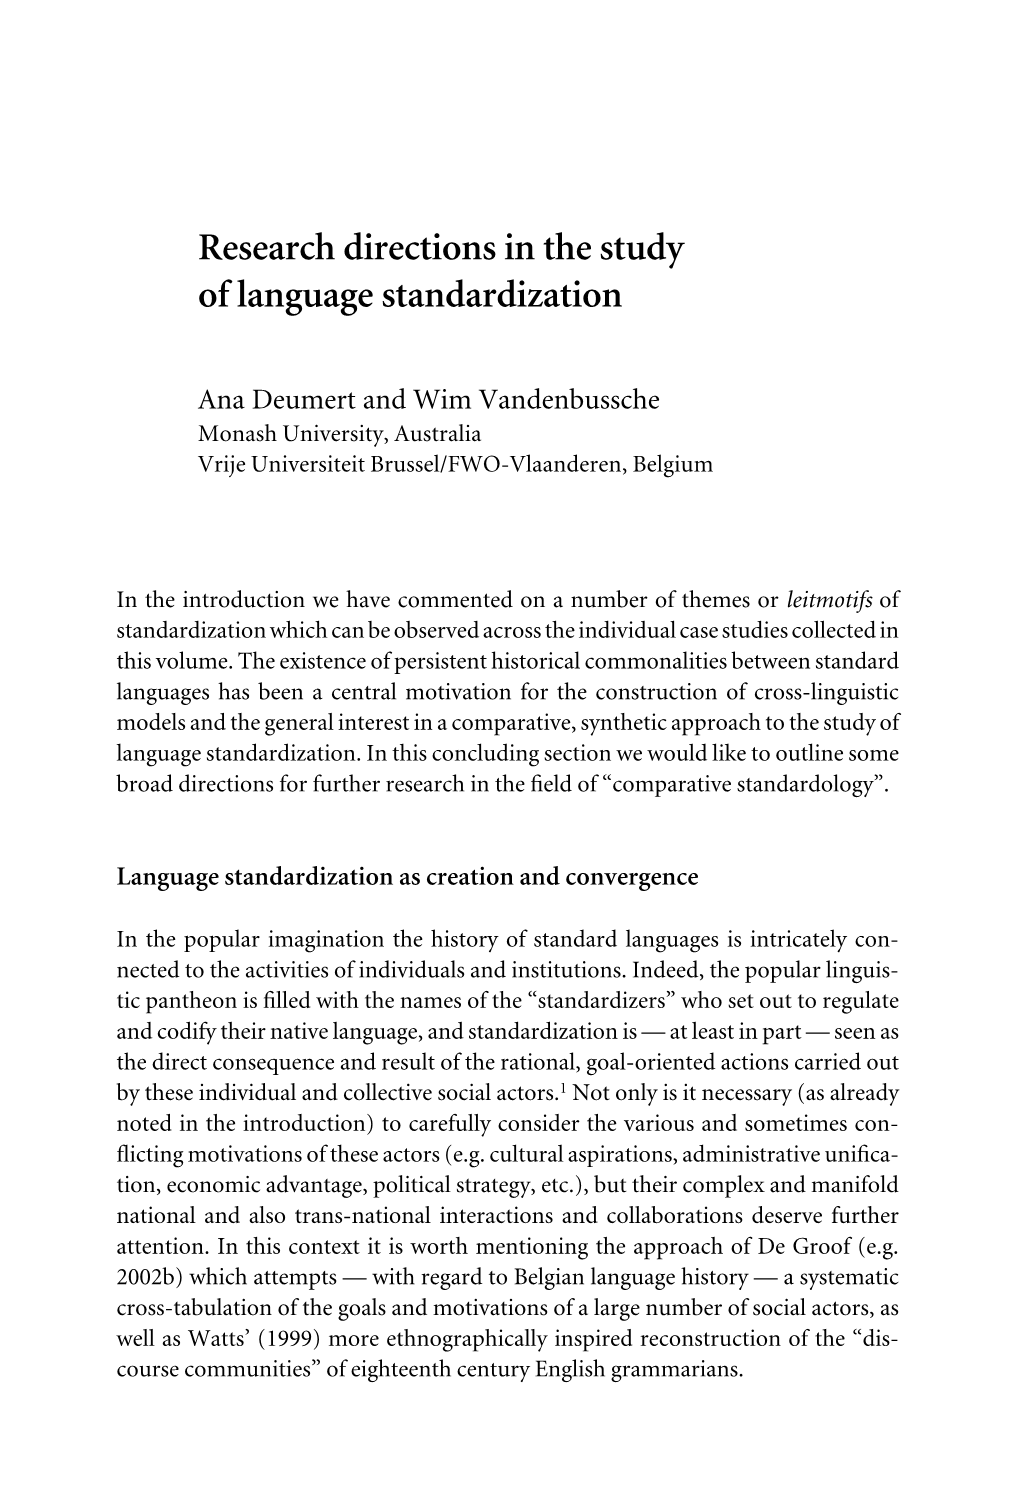 Research Directions in the Study of Language Standardization